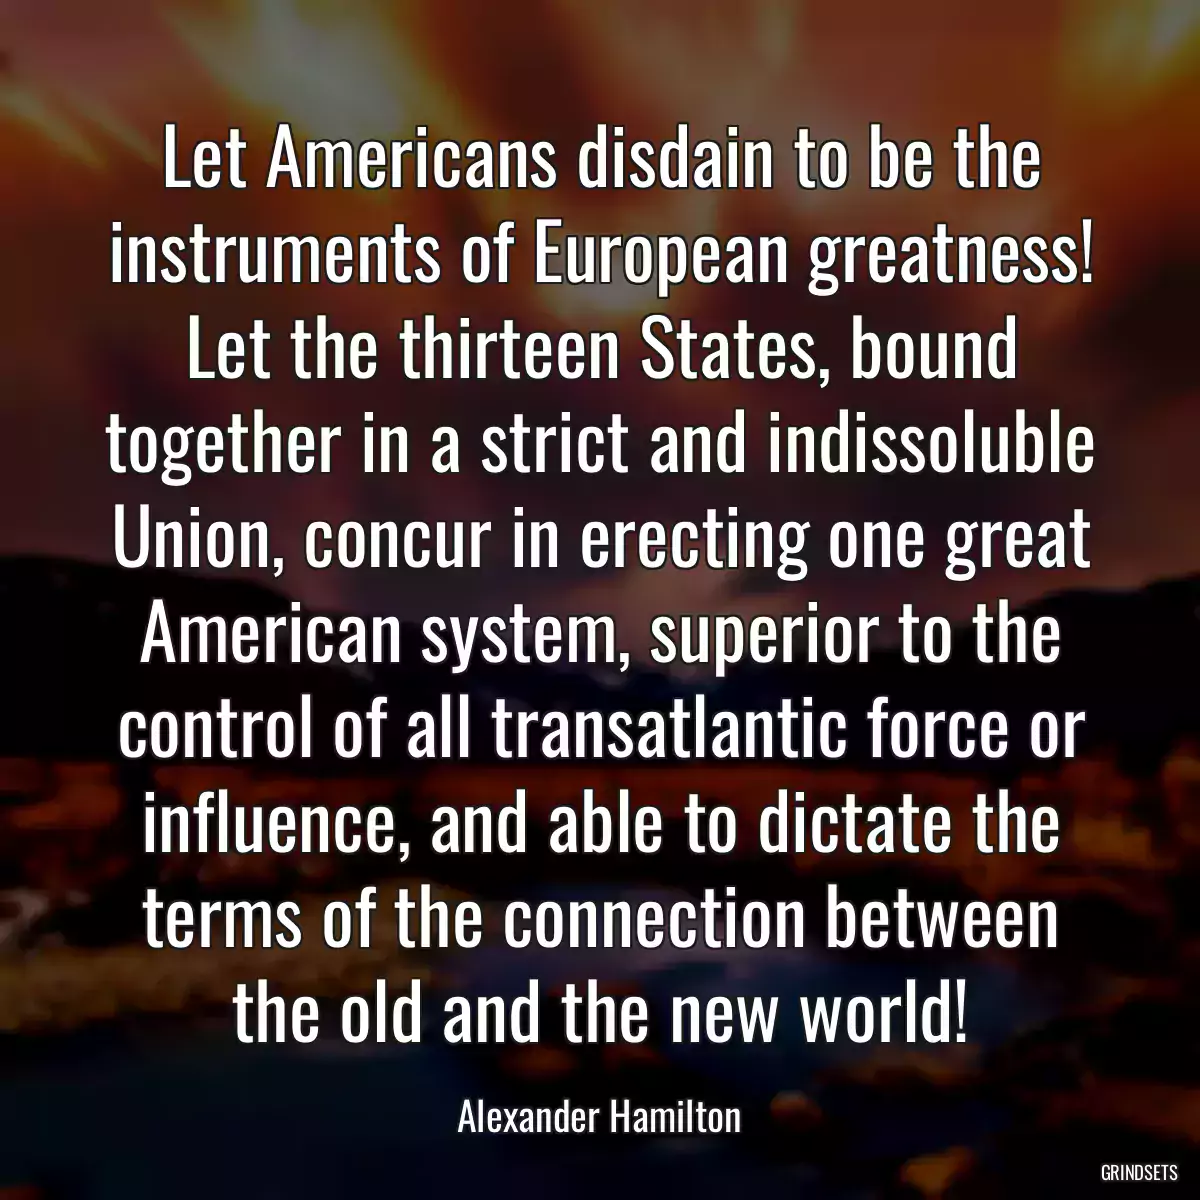 Let Americans disdain to be the instruments of European greatness! Let the thirteen States, bound together in a strict and indissoluble Union, concur in erecting one great American system, superior to the control of all transatlantic force or influence, and able to dictate the terms of the connection between the old and the new world!